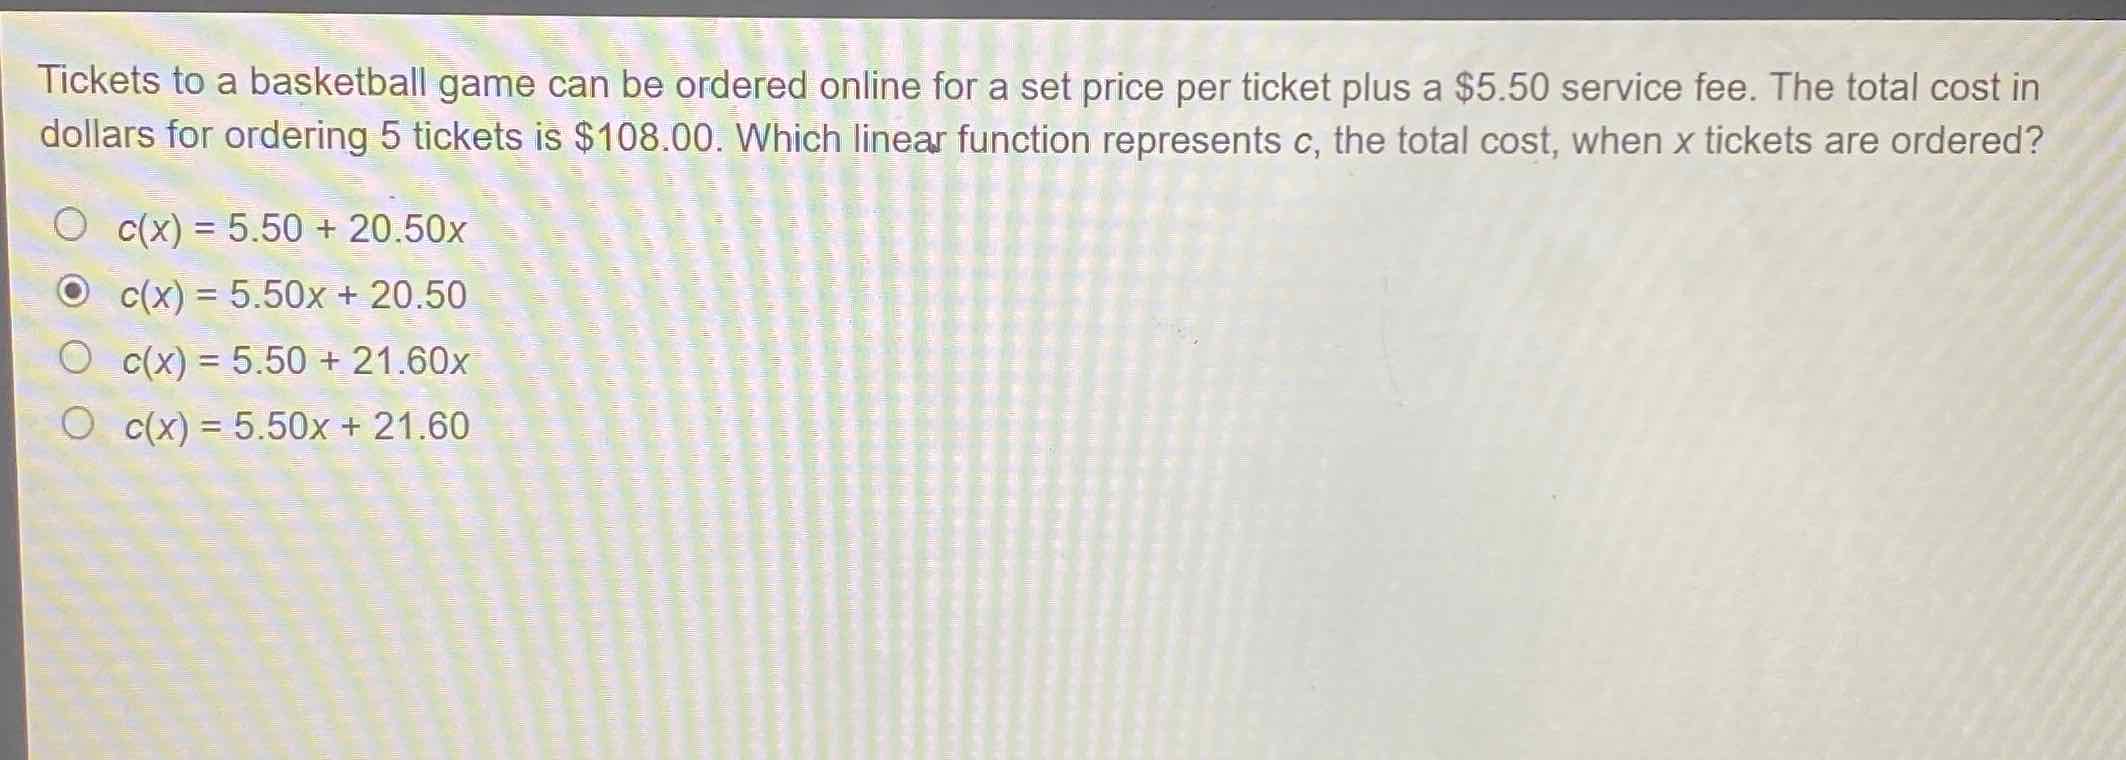 Tickets to a basketball game can be ordered online for a set price per ticket plus a \( \$ 5.50 \) service fee. The total cost in dollars for ordering 5 tickets is \( \$ 108.00 \). Which linear function represents \( c \), the total cost, when \( x \) tickets are ordered?
\( c(x)=5.50+20.50 x \)
\( c(x)=5.50 x+20.50 \)
\( c(x)=5.50+21.60 x \)
\( c(x)=5.50 x+21.60 \)